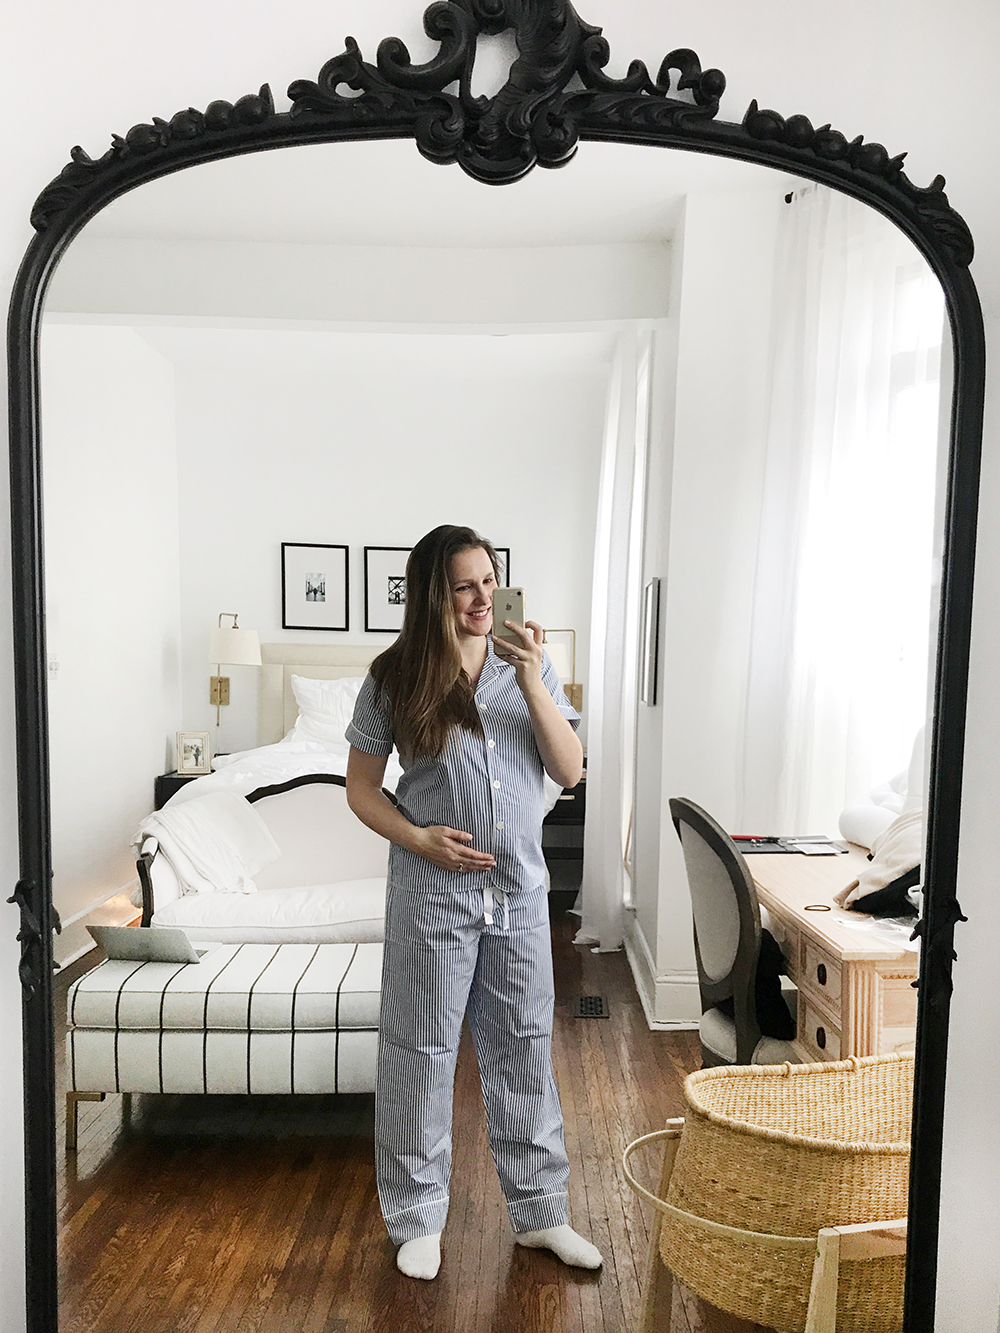 15 of the Cutest Pajamas for Summer - Elizabeth Street Post